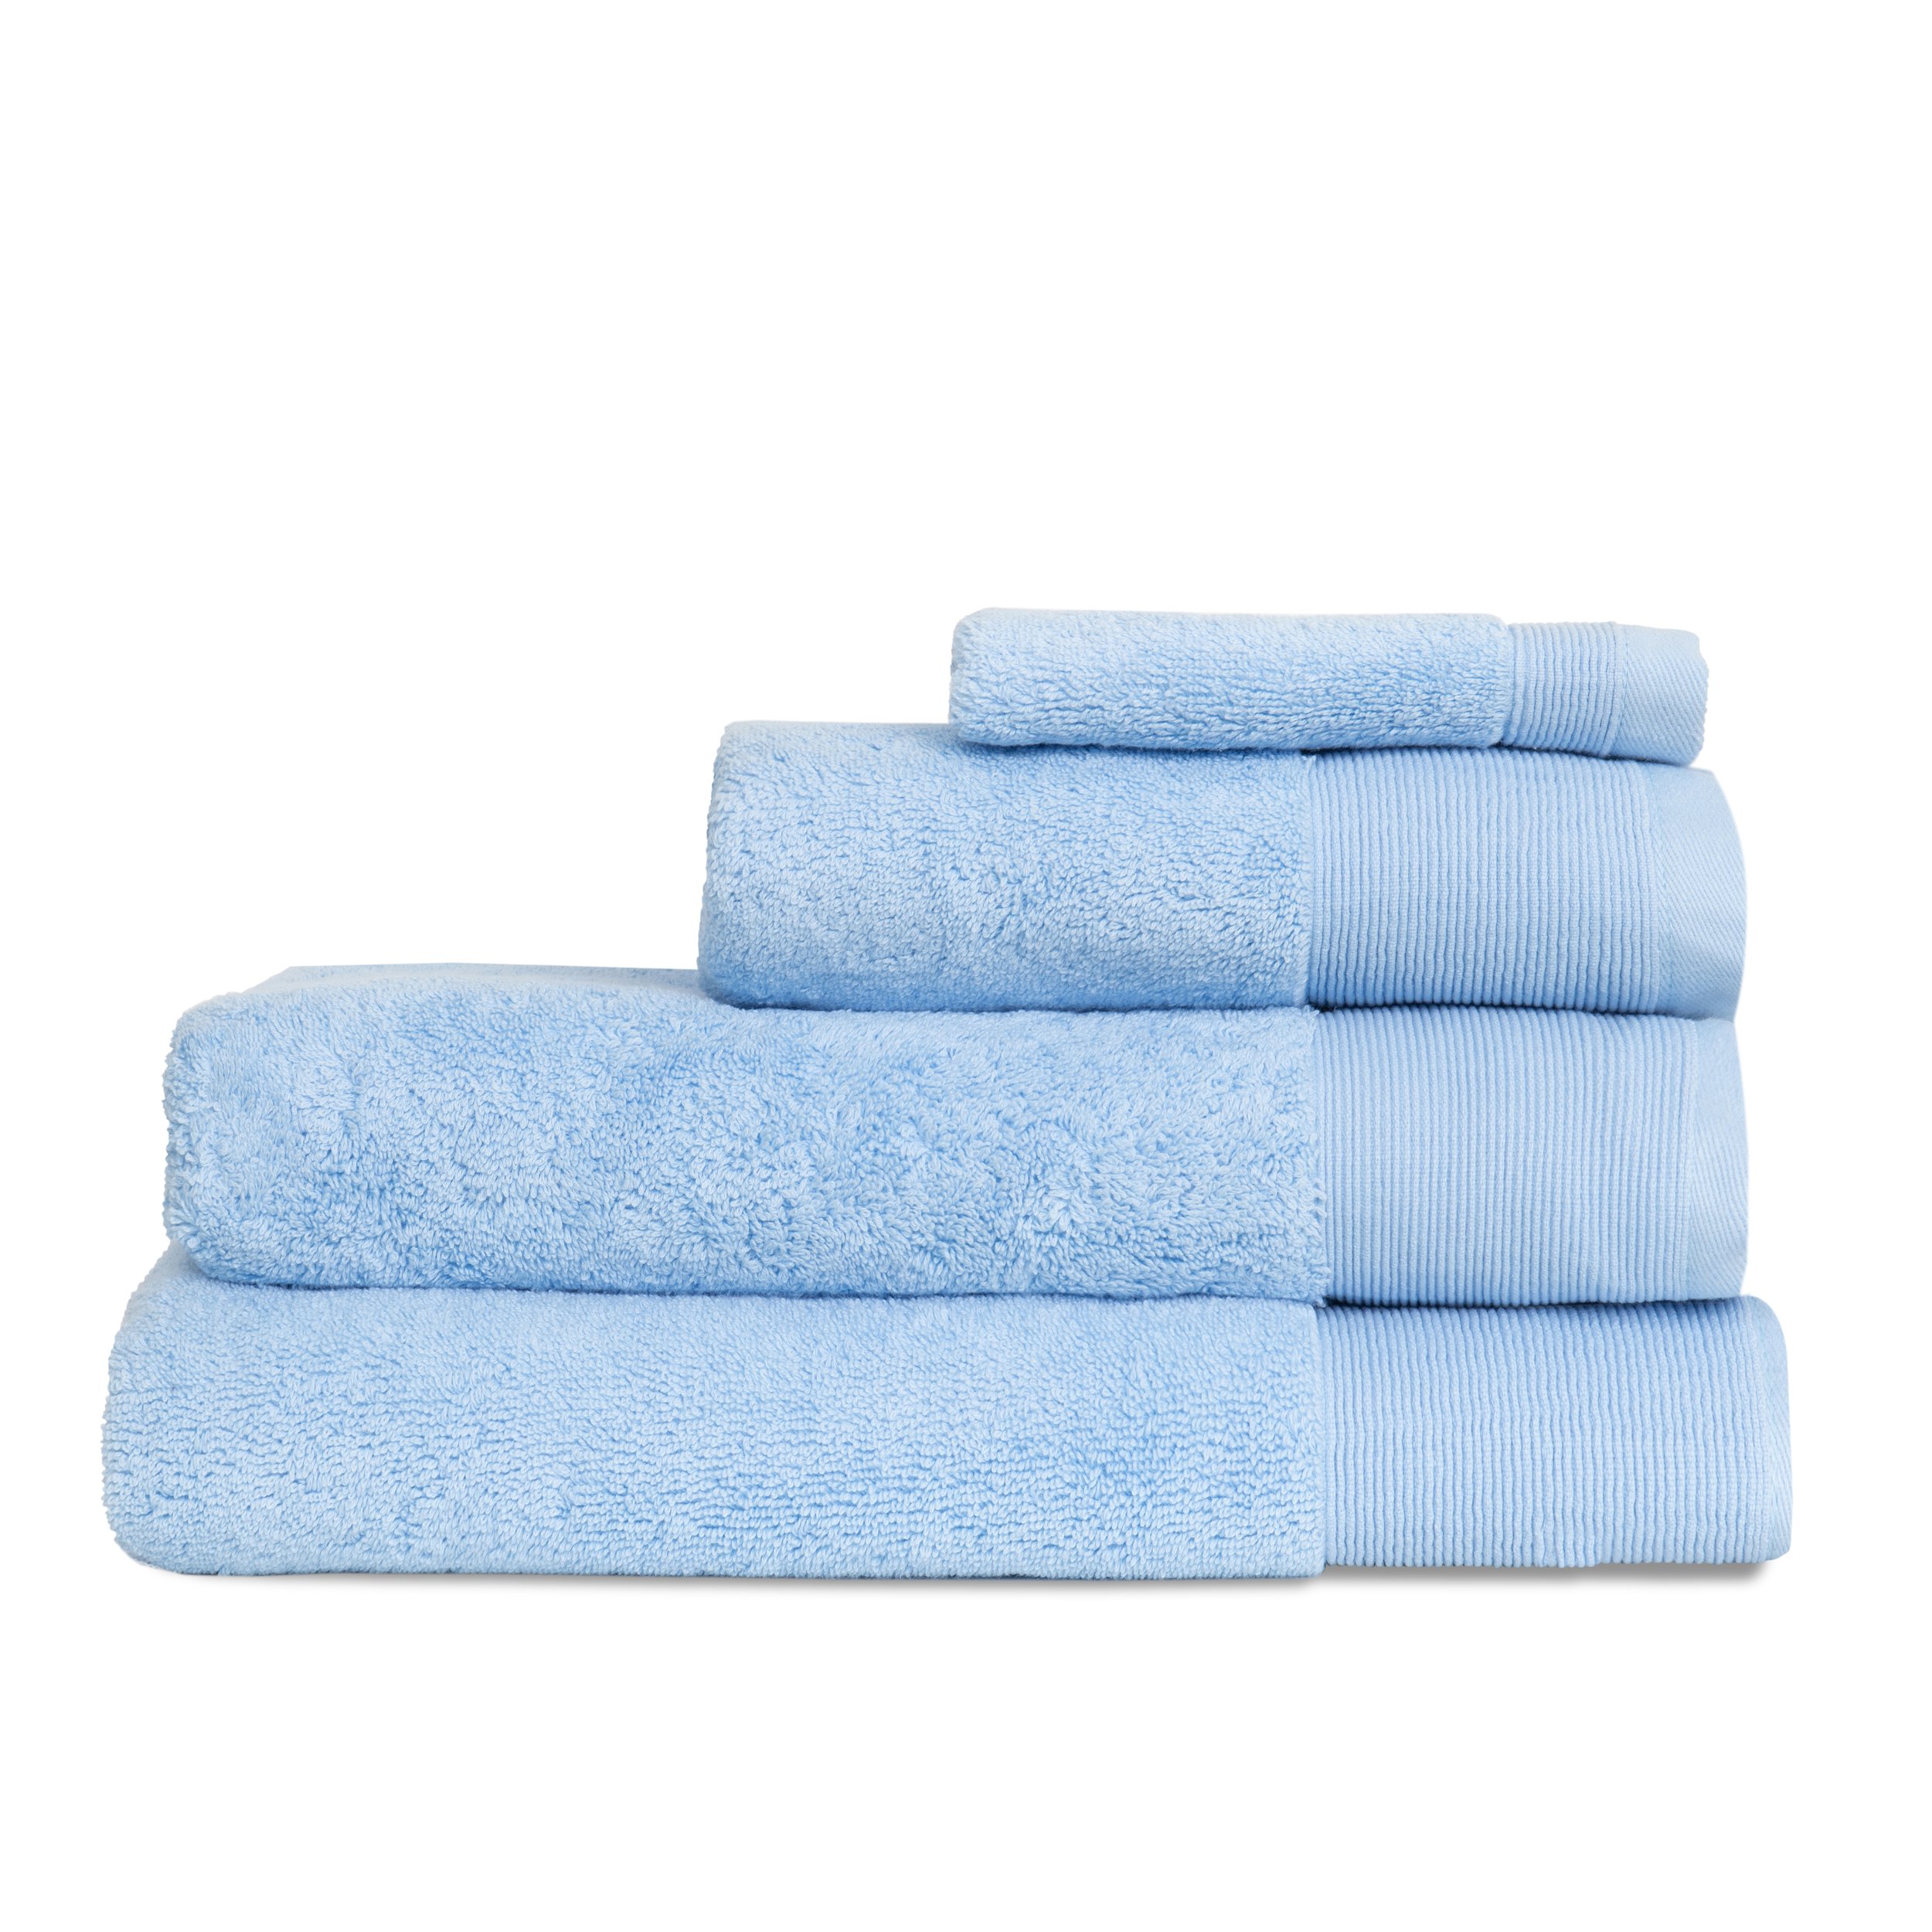 3.THE FINE COTTON COMPANY Blue Towel Set Organic Cotton from €4.69, 